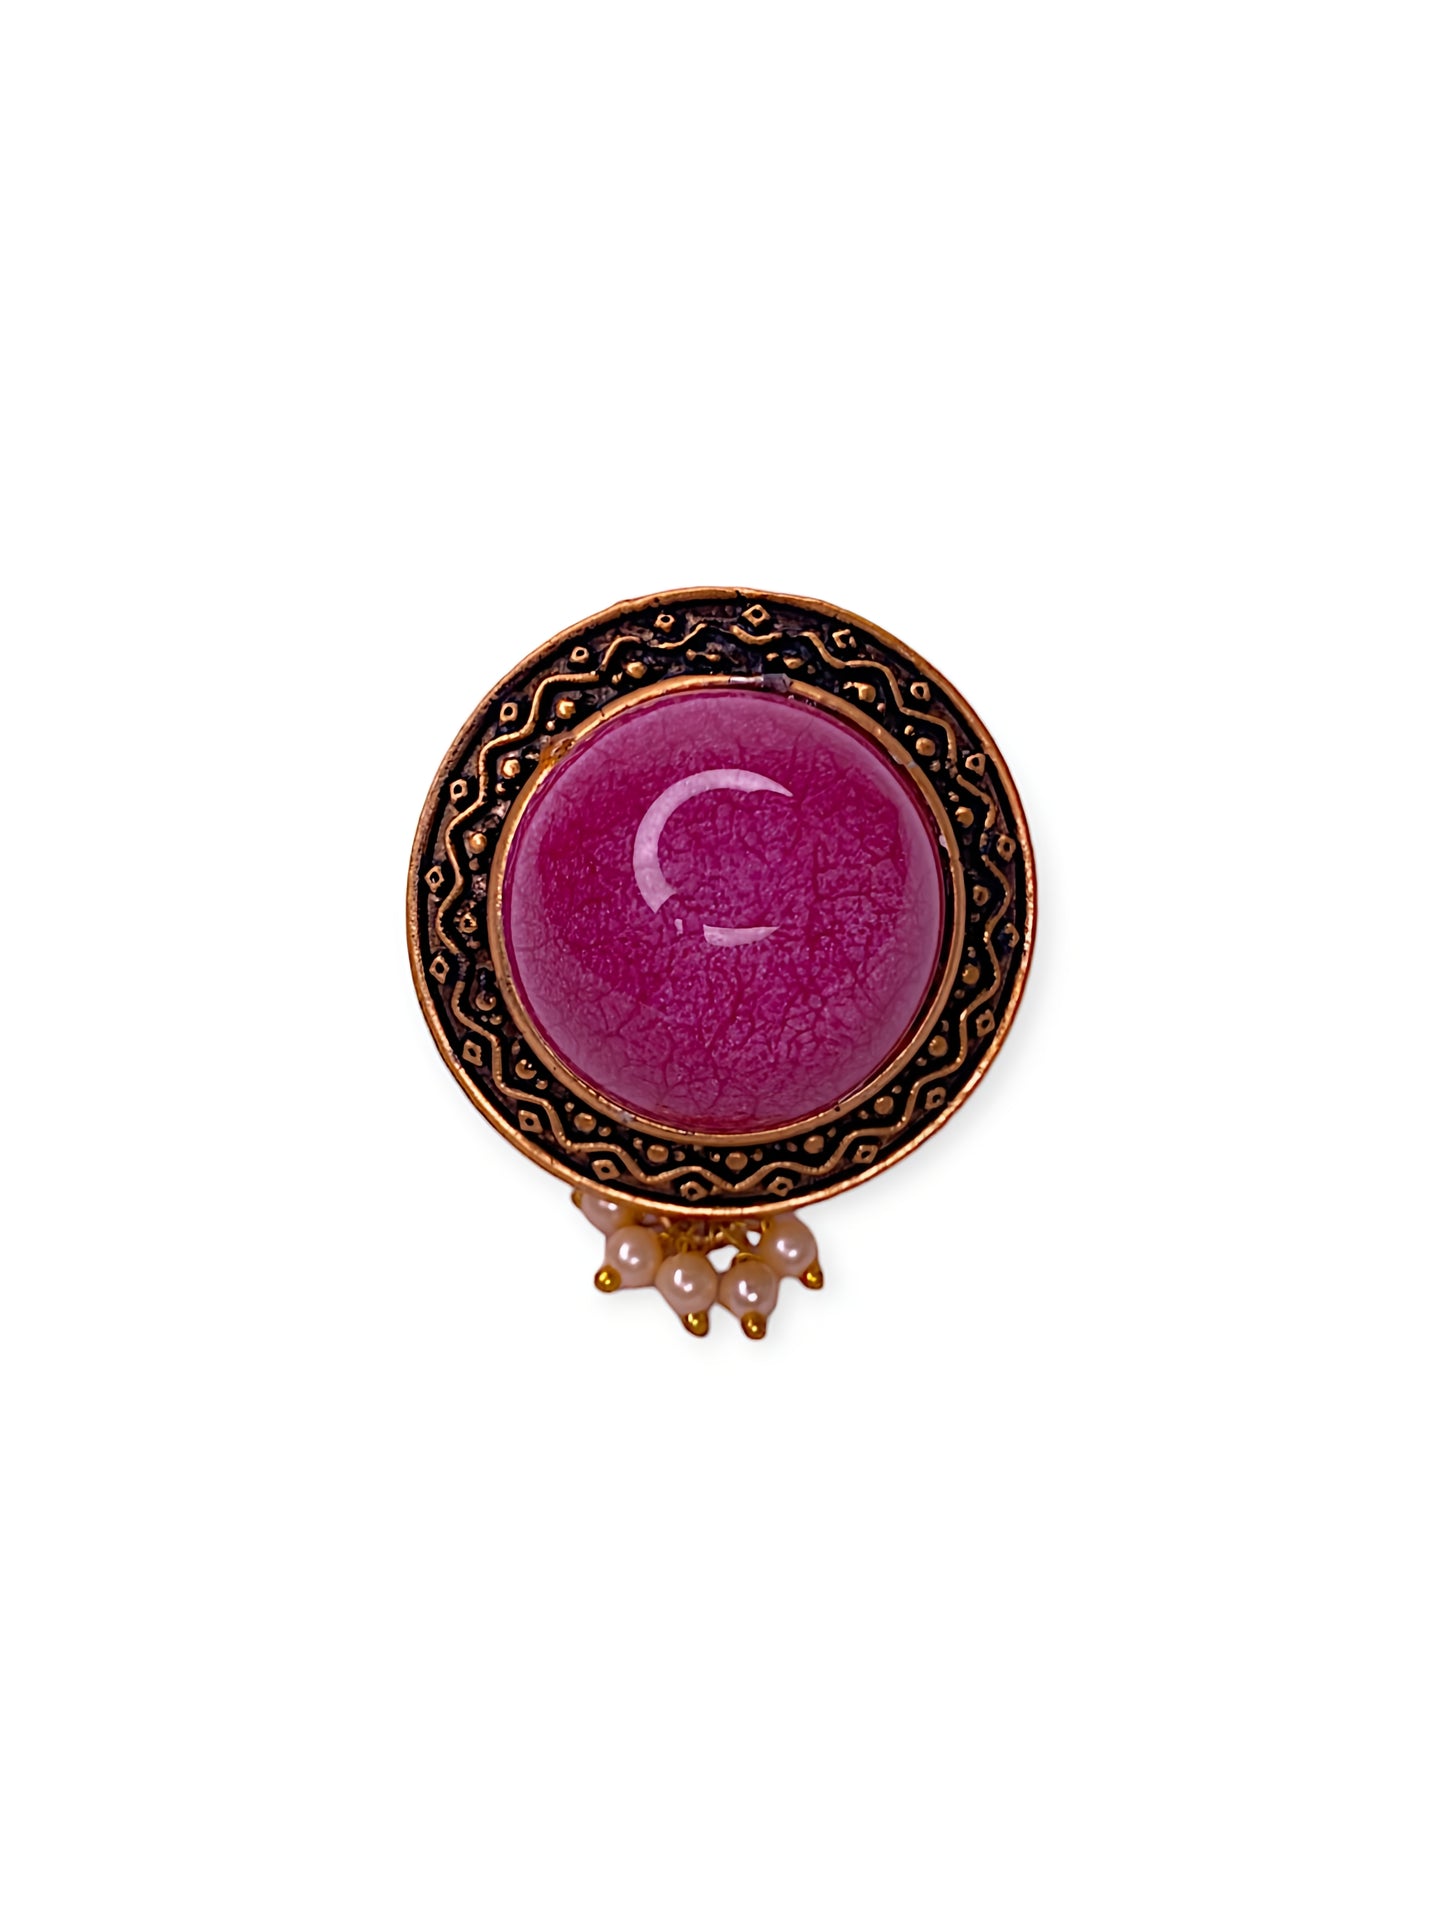 Vintage-Inspired Fuchsia Glass Ring with Ornate Rose Gold-Tone Setting